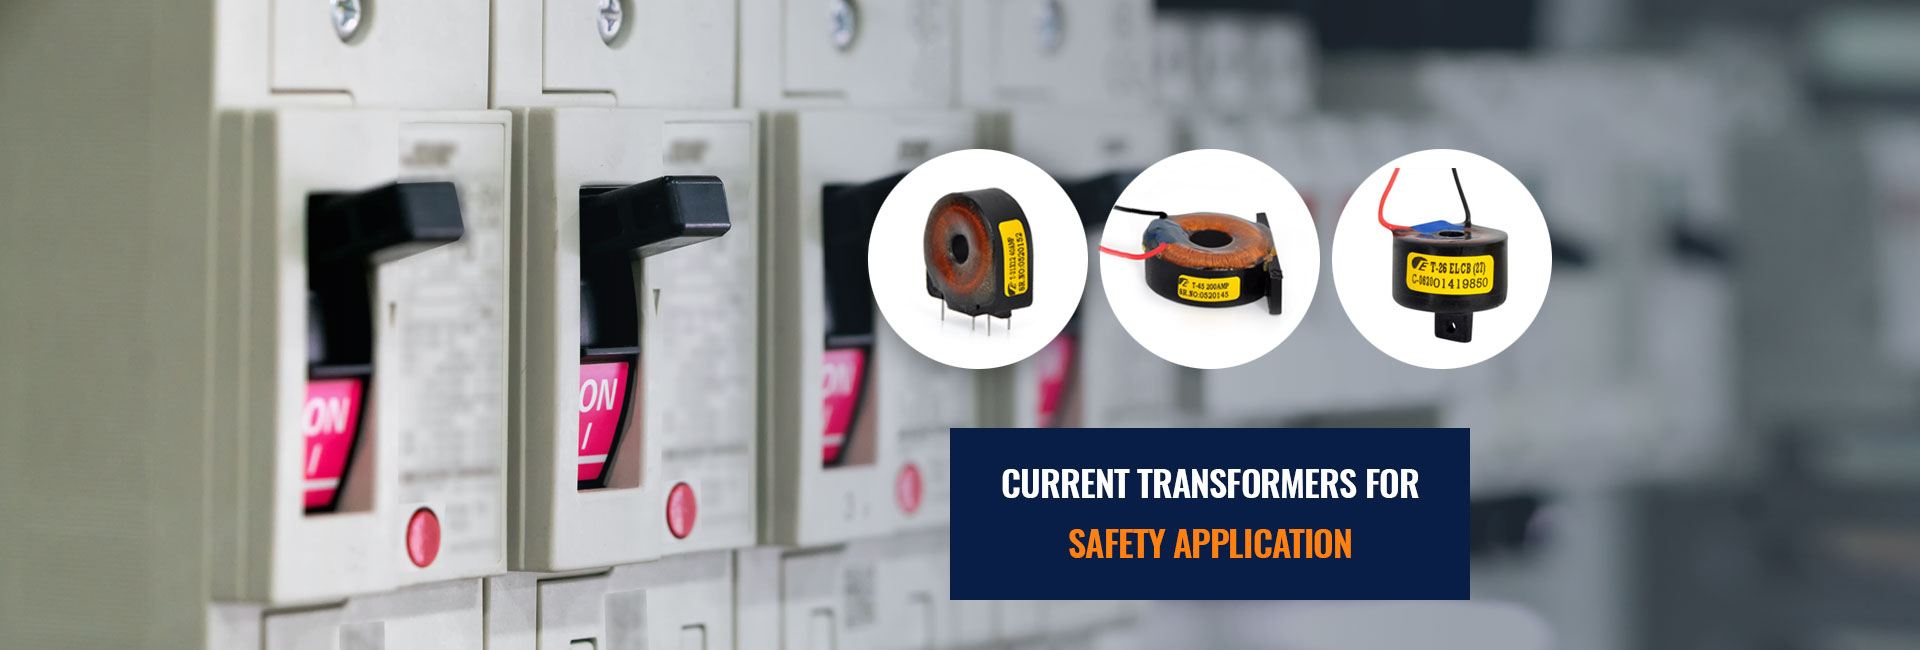 Current Transformers for Safety Application